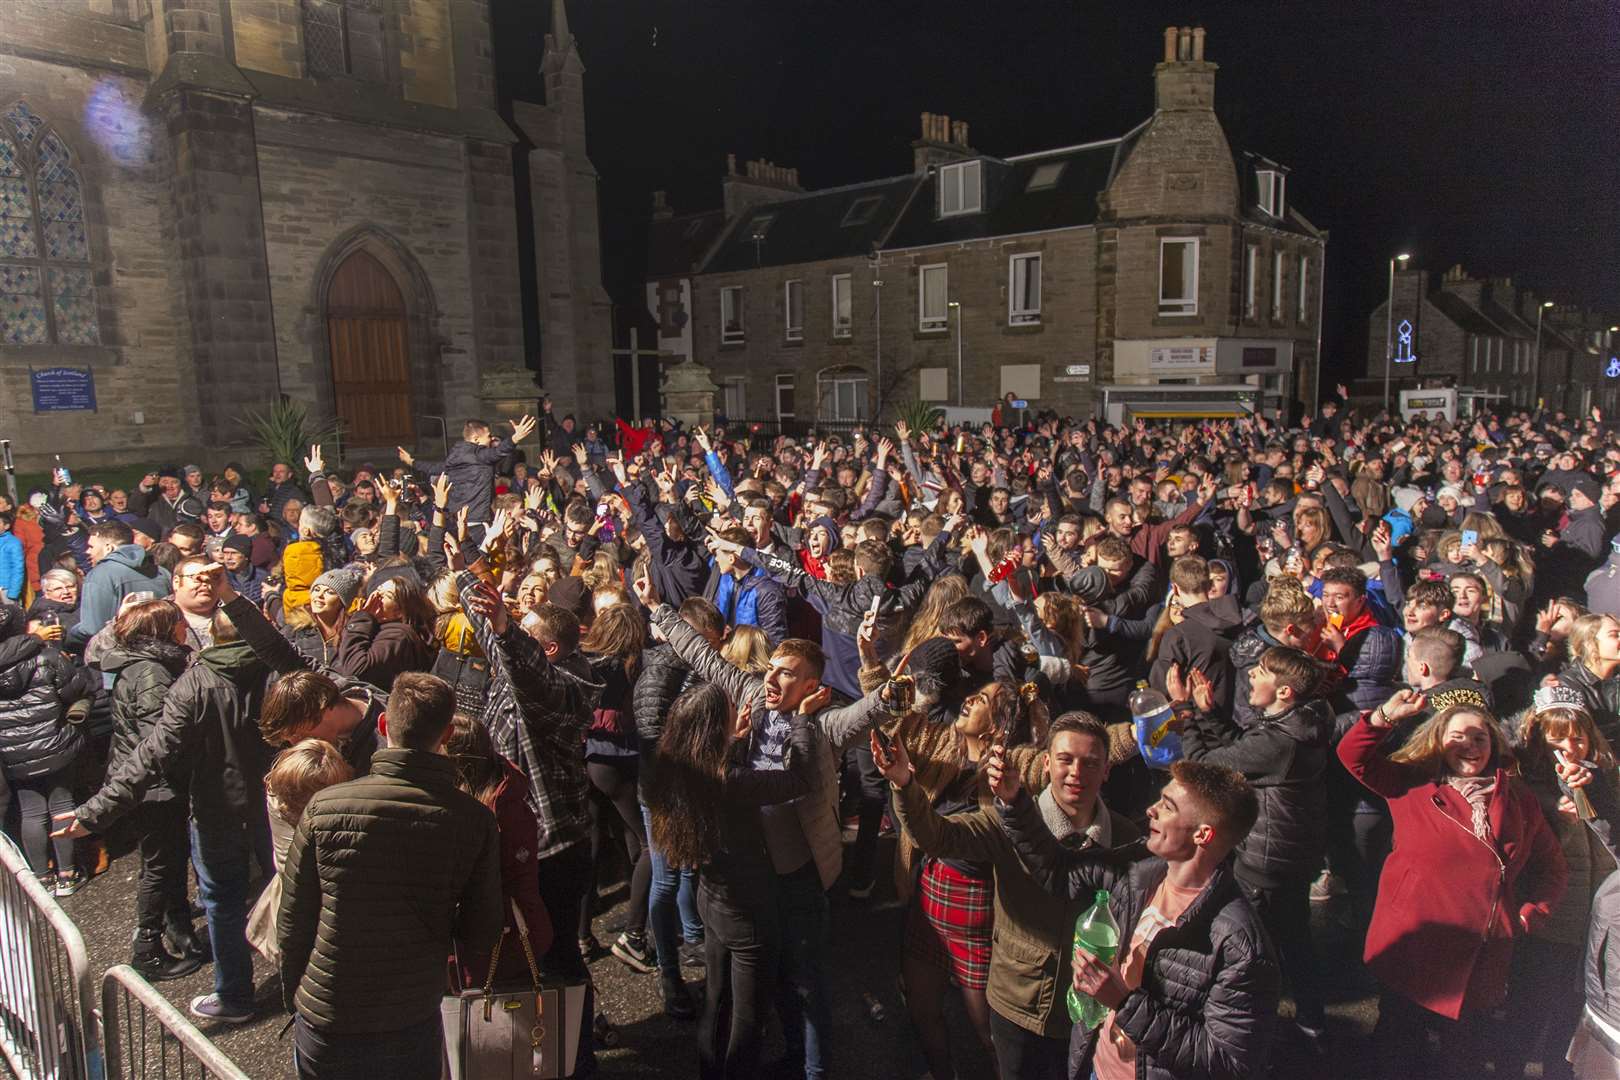 A great turnout of Hogmanay revellers at the 2019 street party in Thurso. Picture: Ann-Marie Jones / Northern Studios